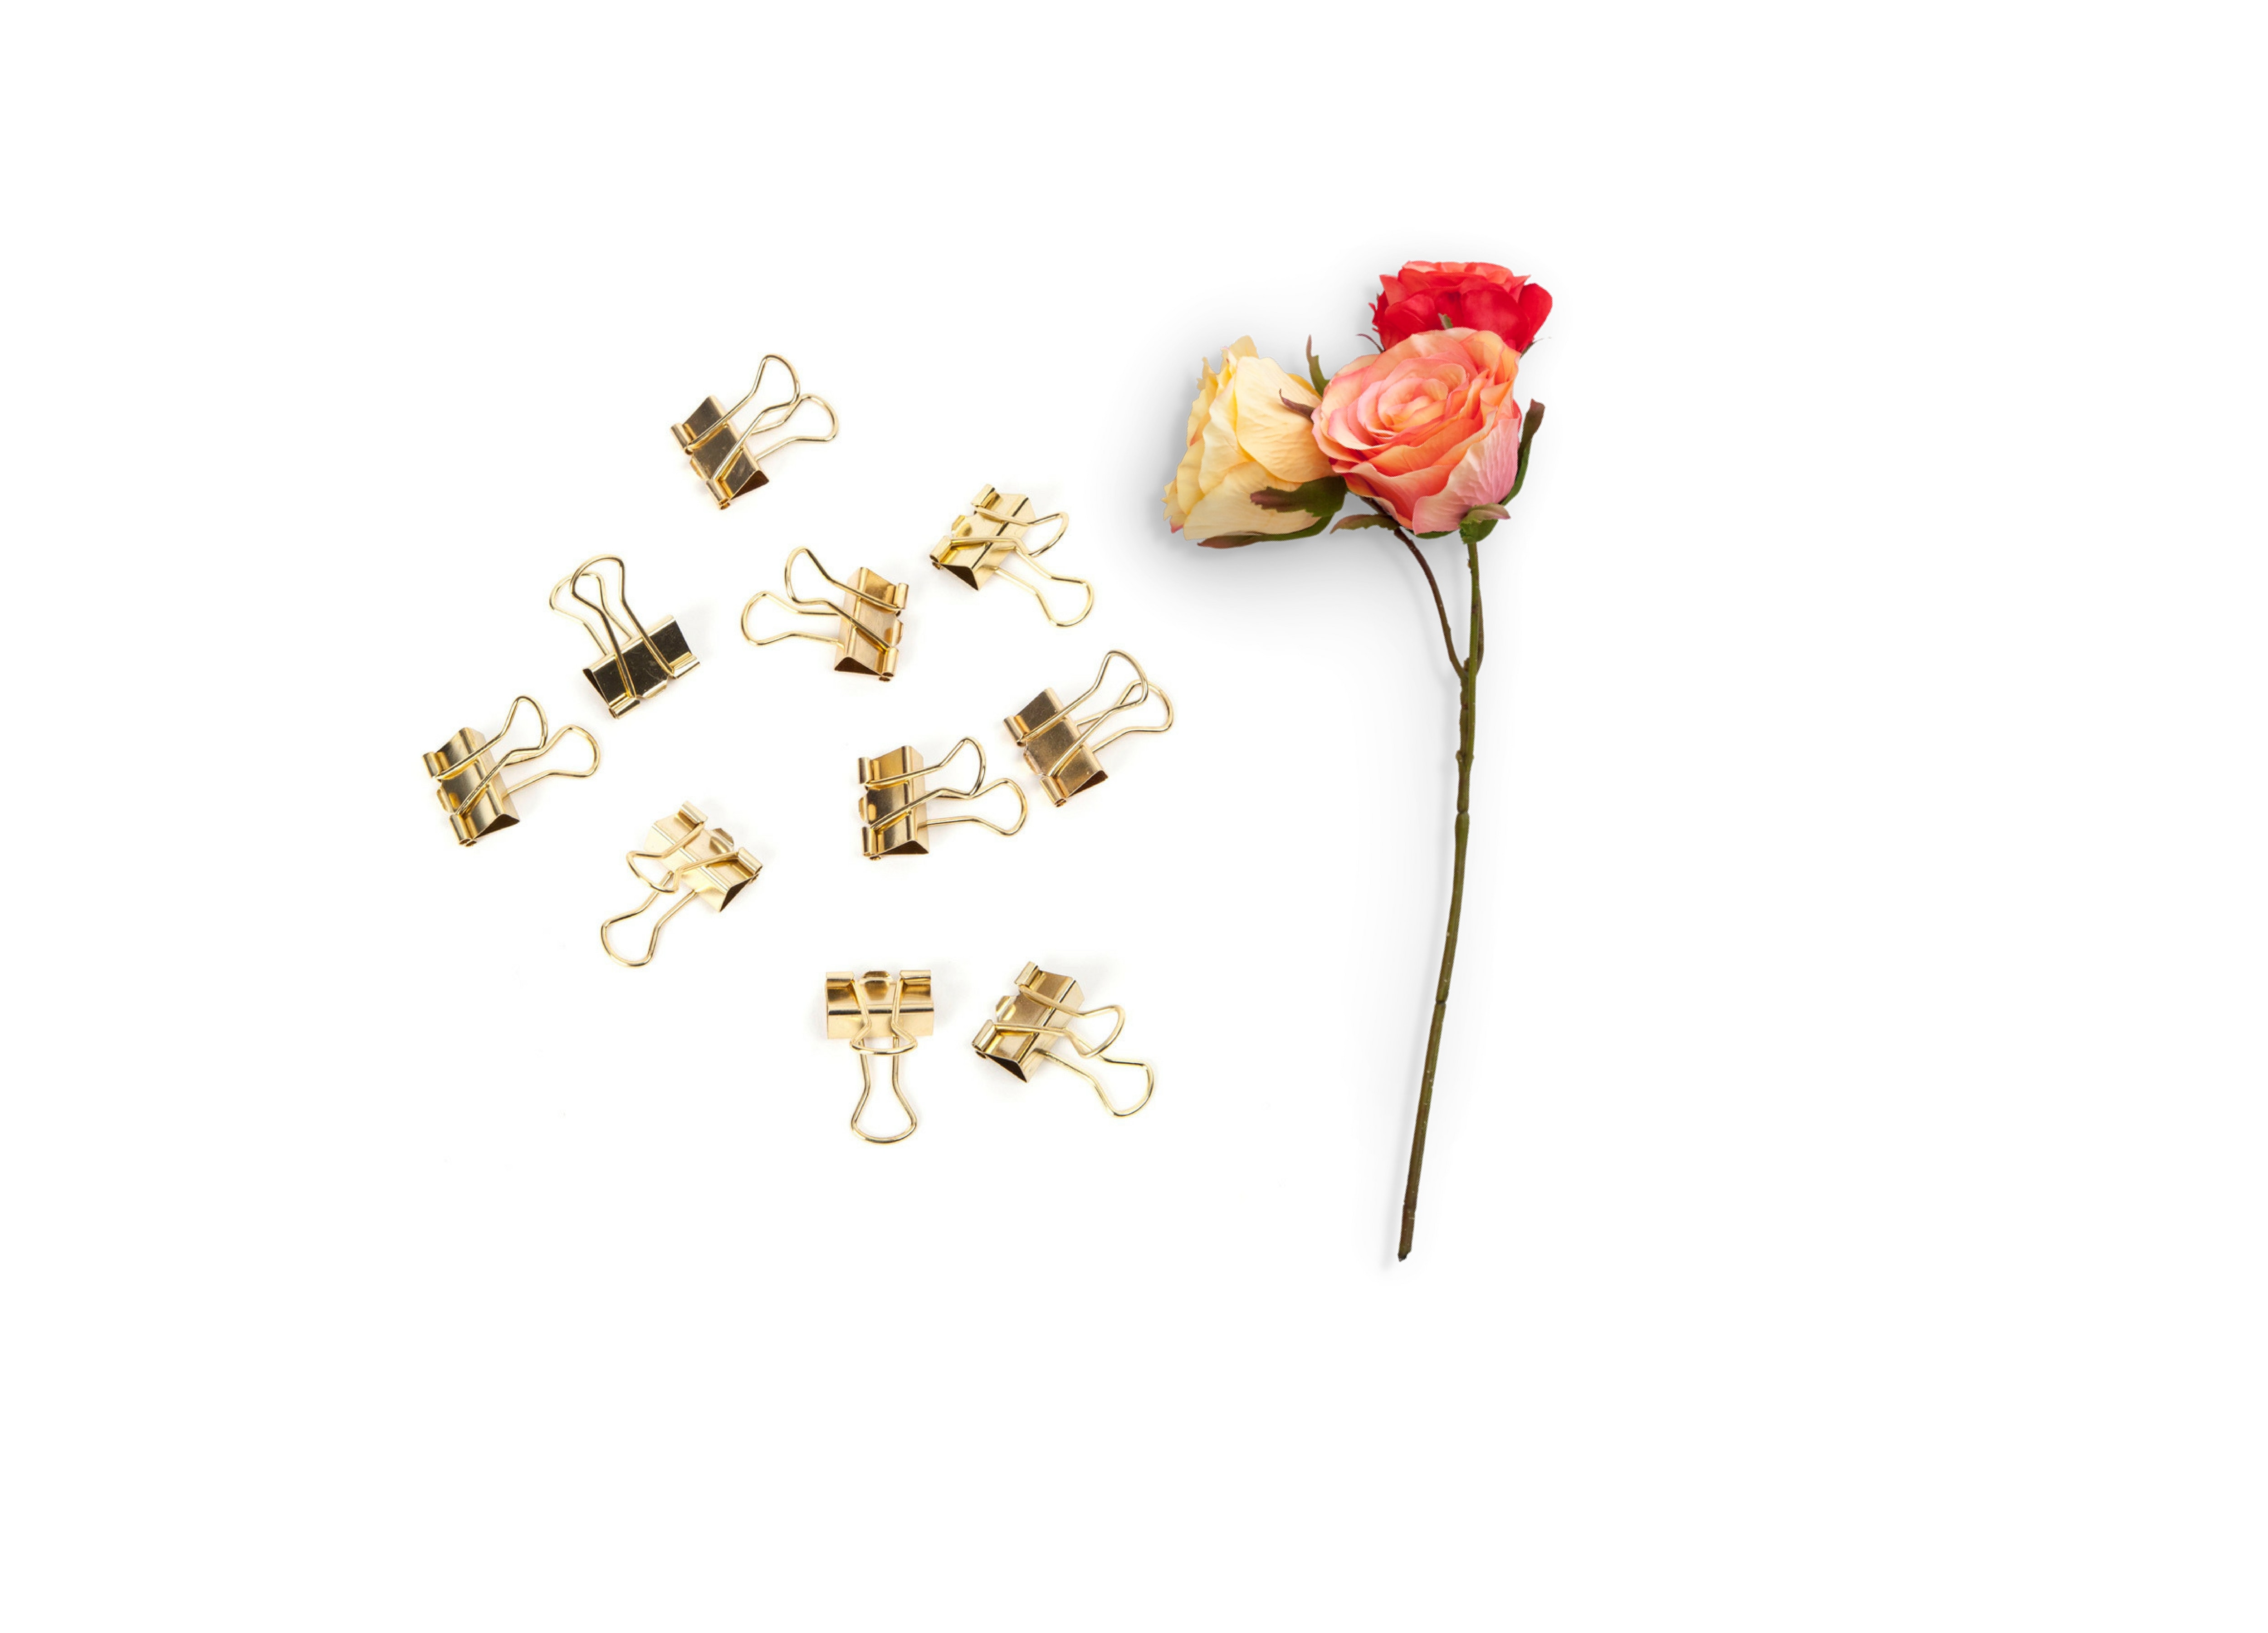 Three red, yellow, and pink roses and brass-colored clips photo